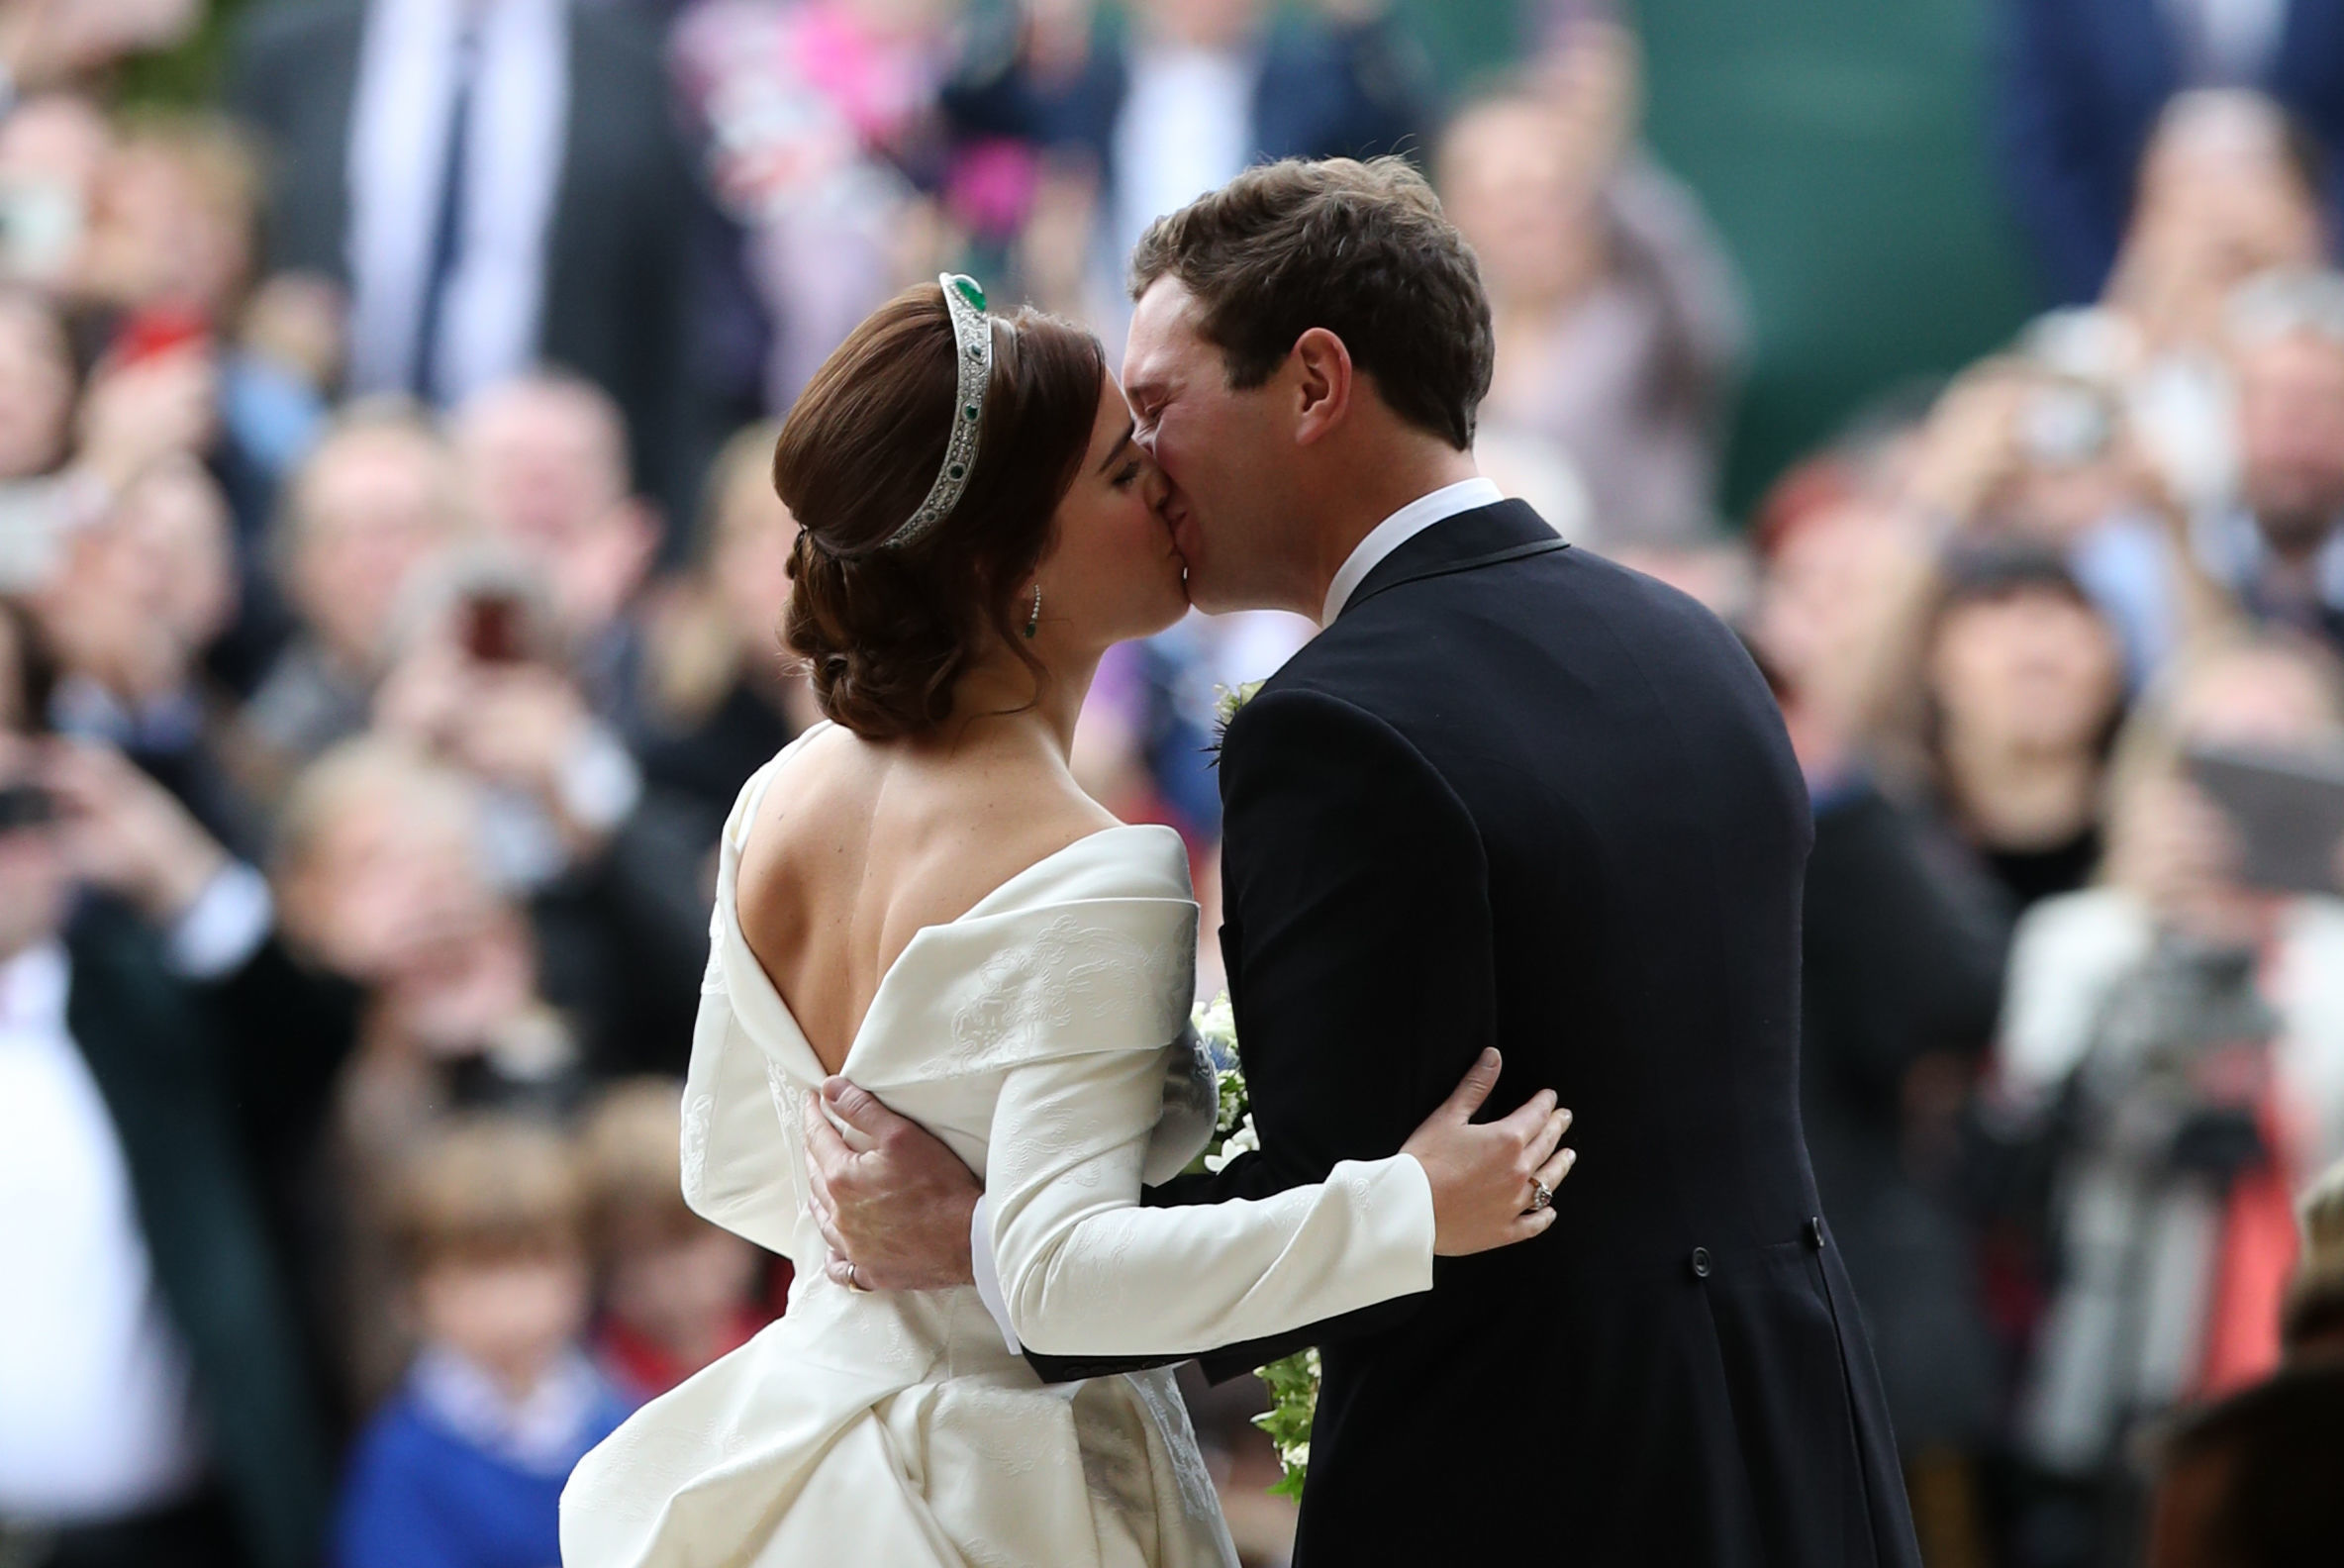 Princess Eugenie and Jack Brooksbank. Getty Images